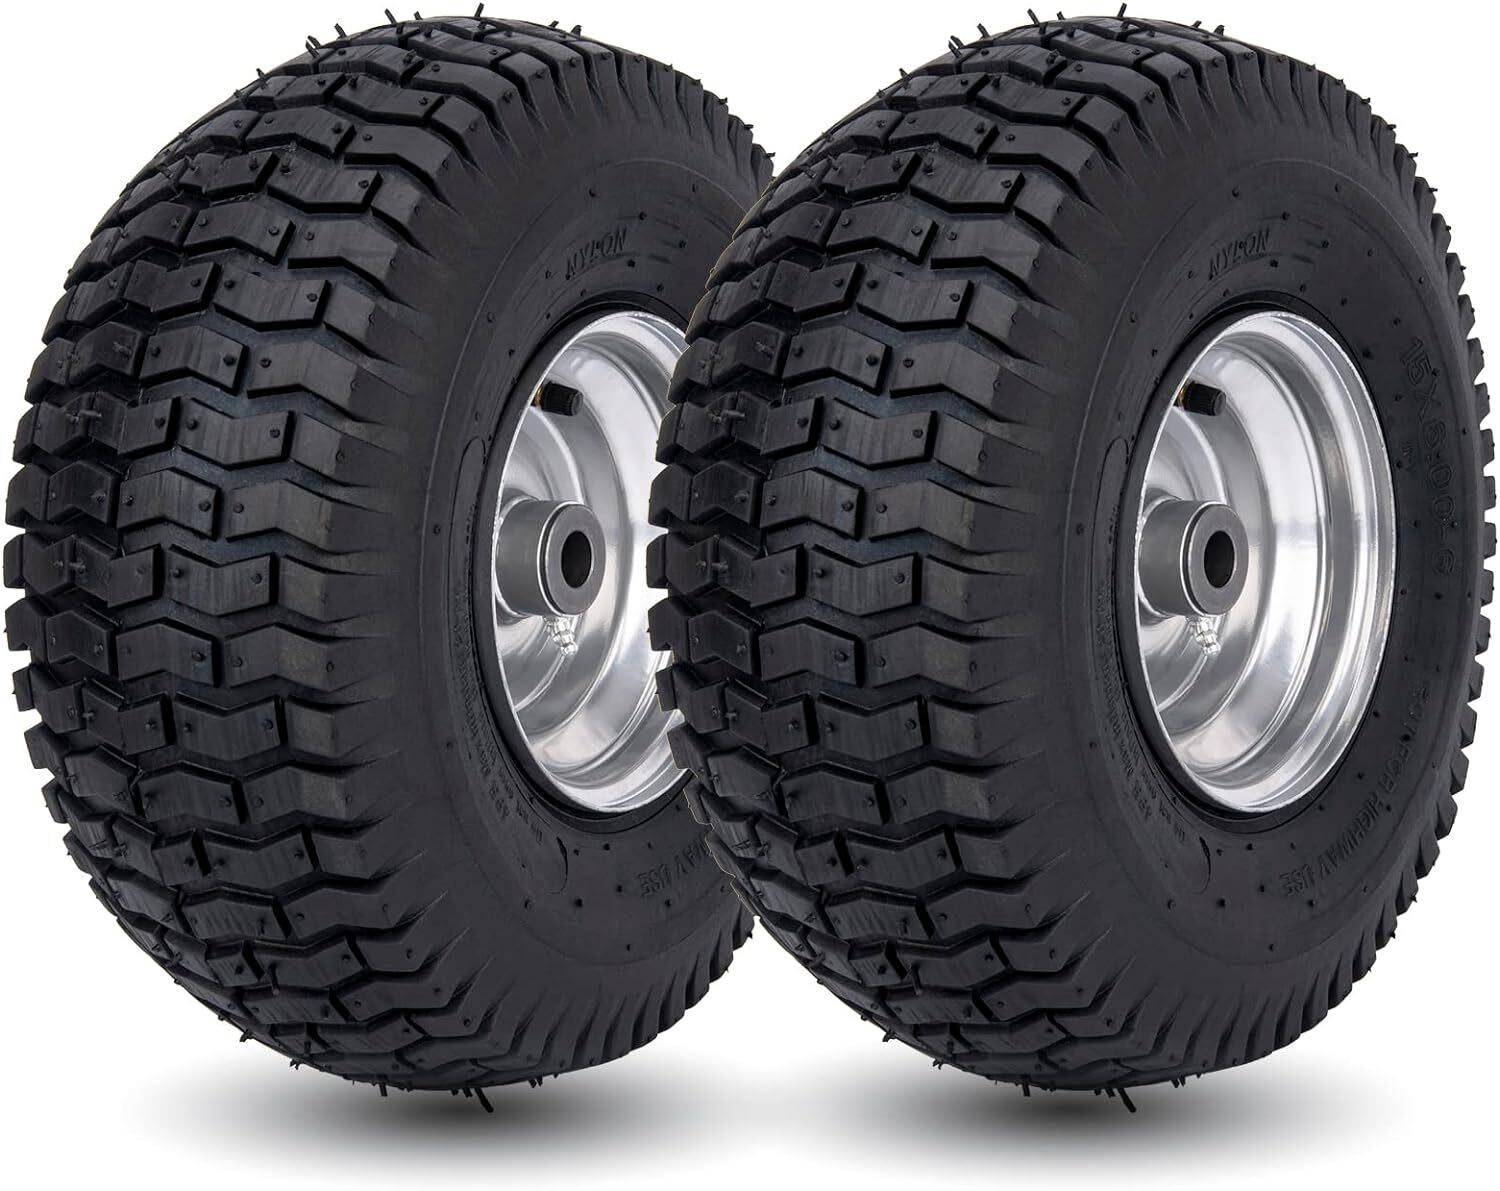 2 Pack 15x6.00-6 Lawn Mower Tires